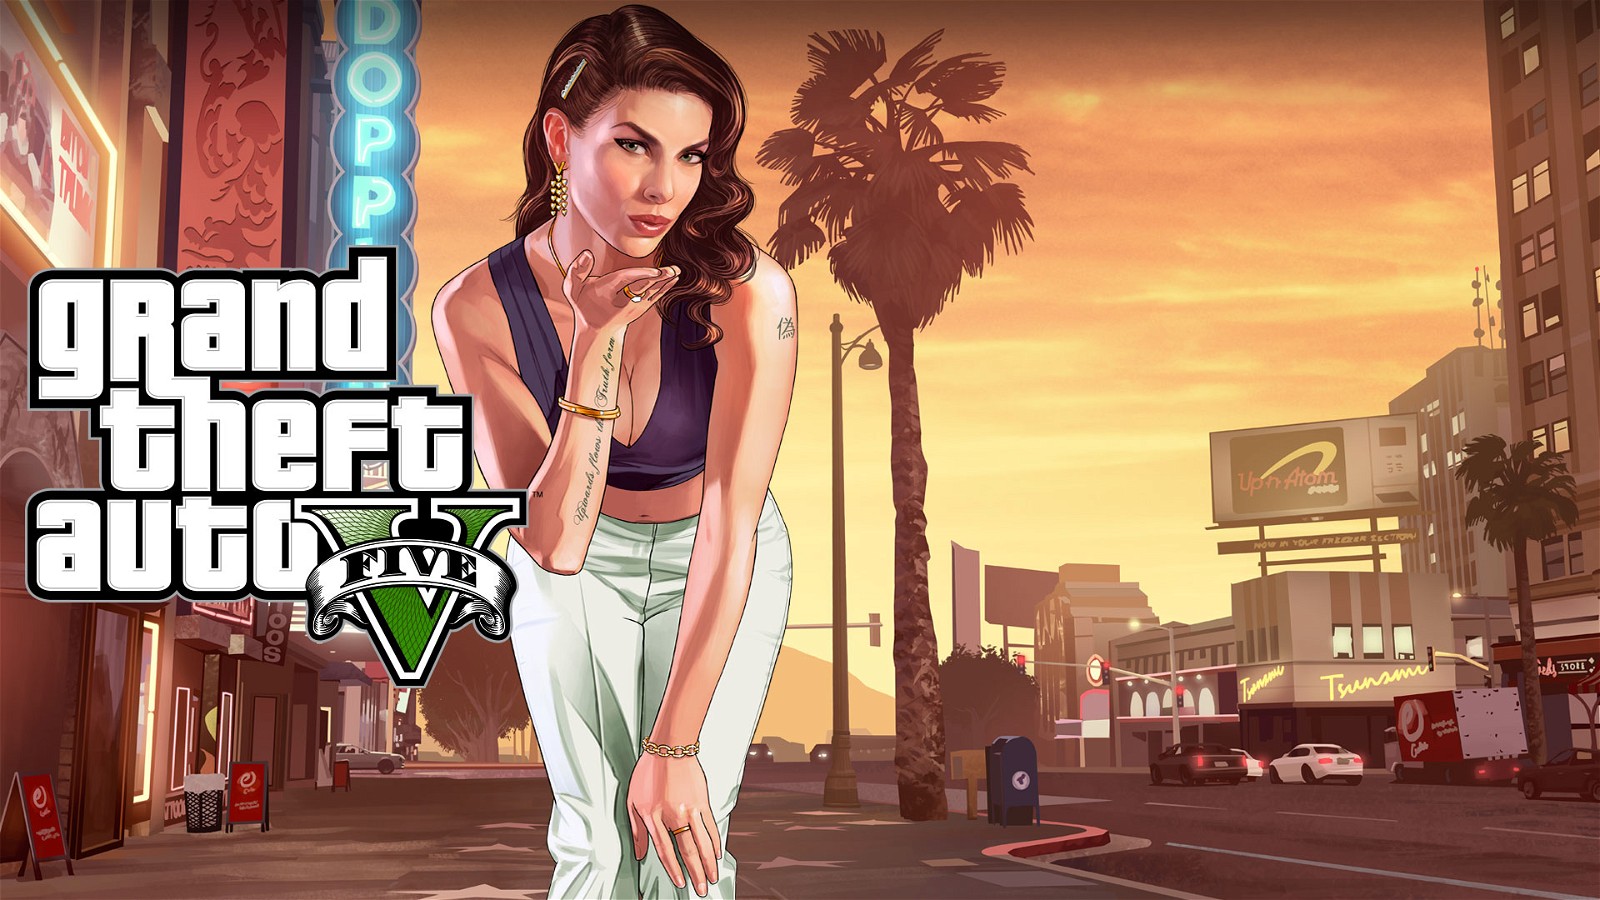 GTA 5 - The Latest Release in the Series (Codename was Rush) fireball